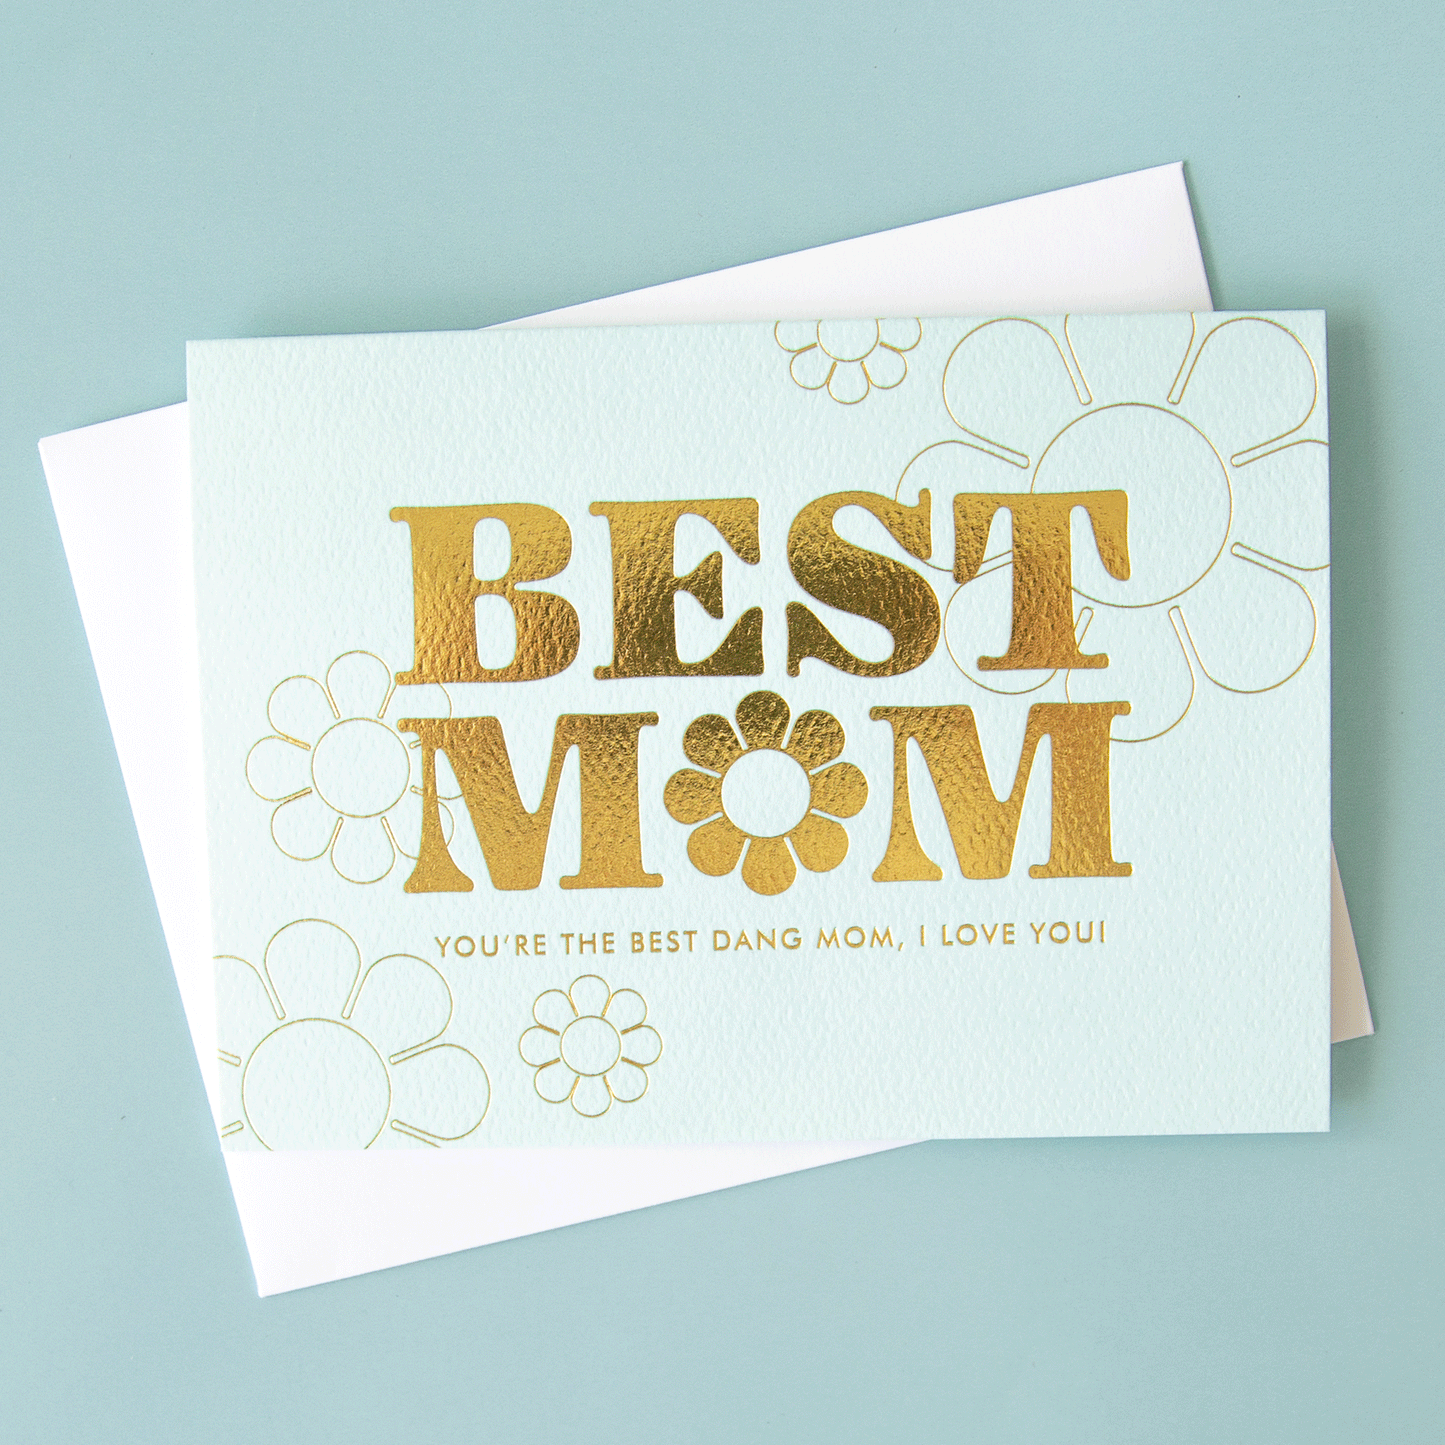 On a blue background is a light blue card with gold foiled text that reads, "Best Mom You're The Best Dang Mom, I Love You" along with a flower shape in the place of the 'O' on 'Mom'.